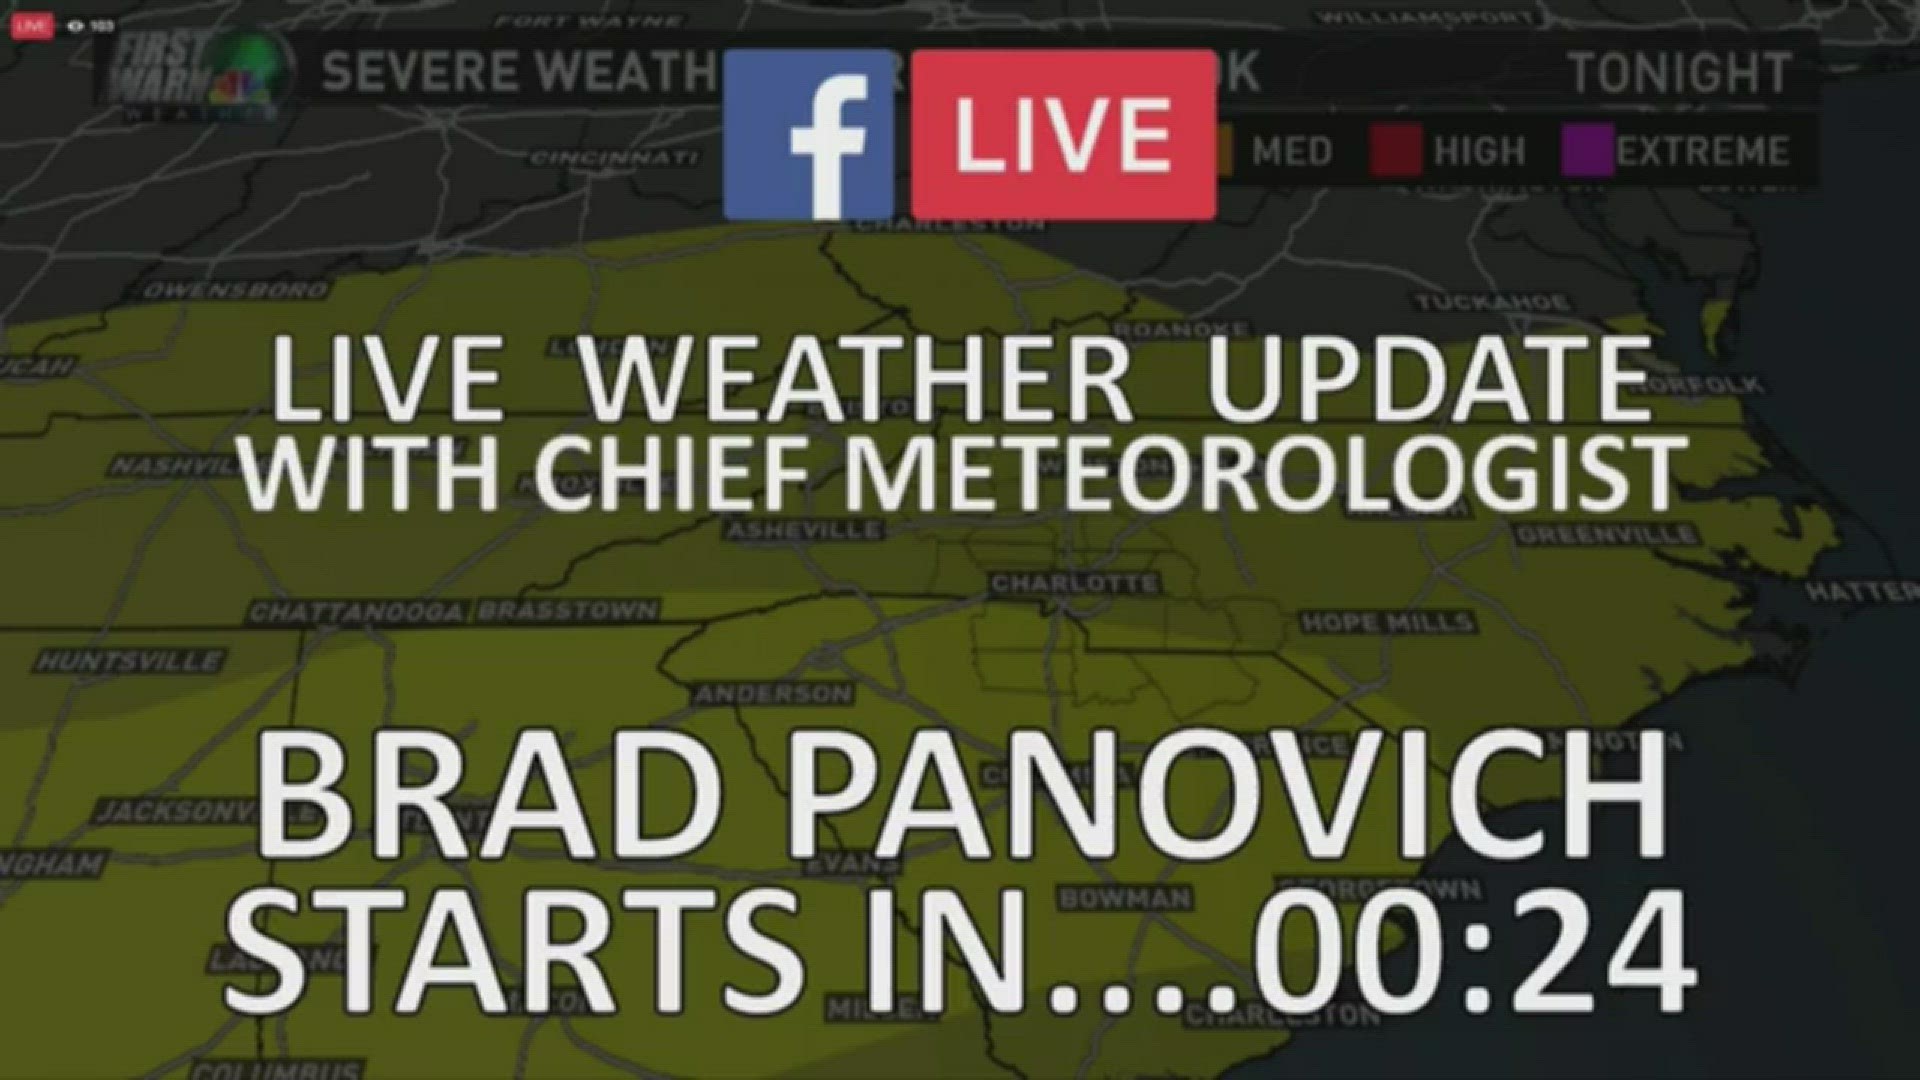 Chief Meteorologist Brad Panovich tracks down the possible severe storms in the Carolinas.